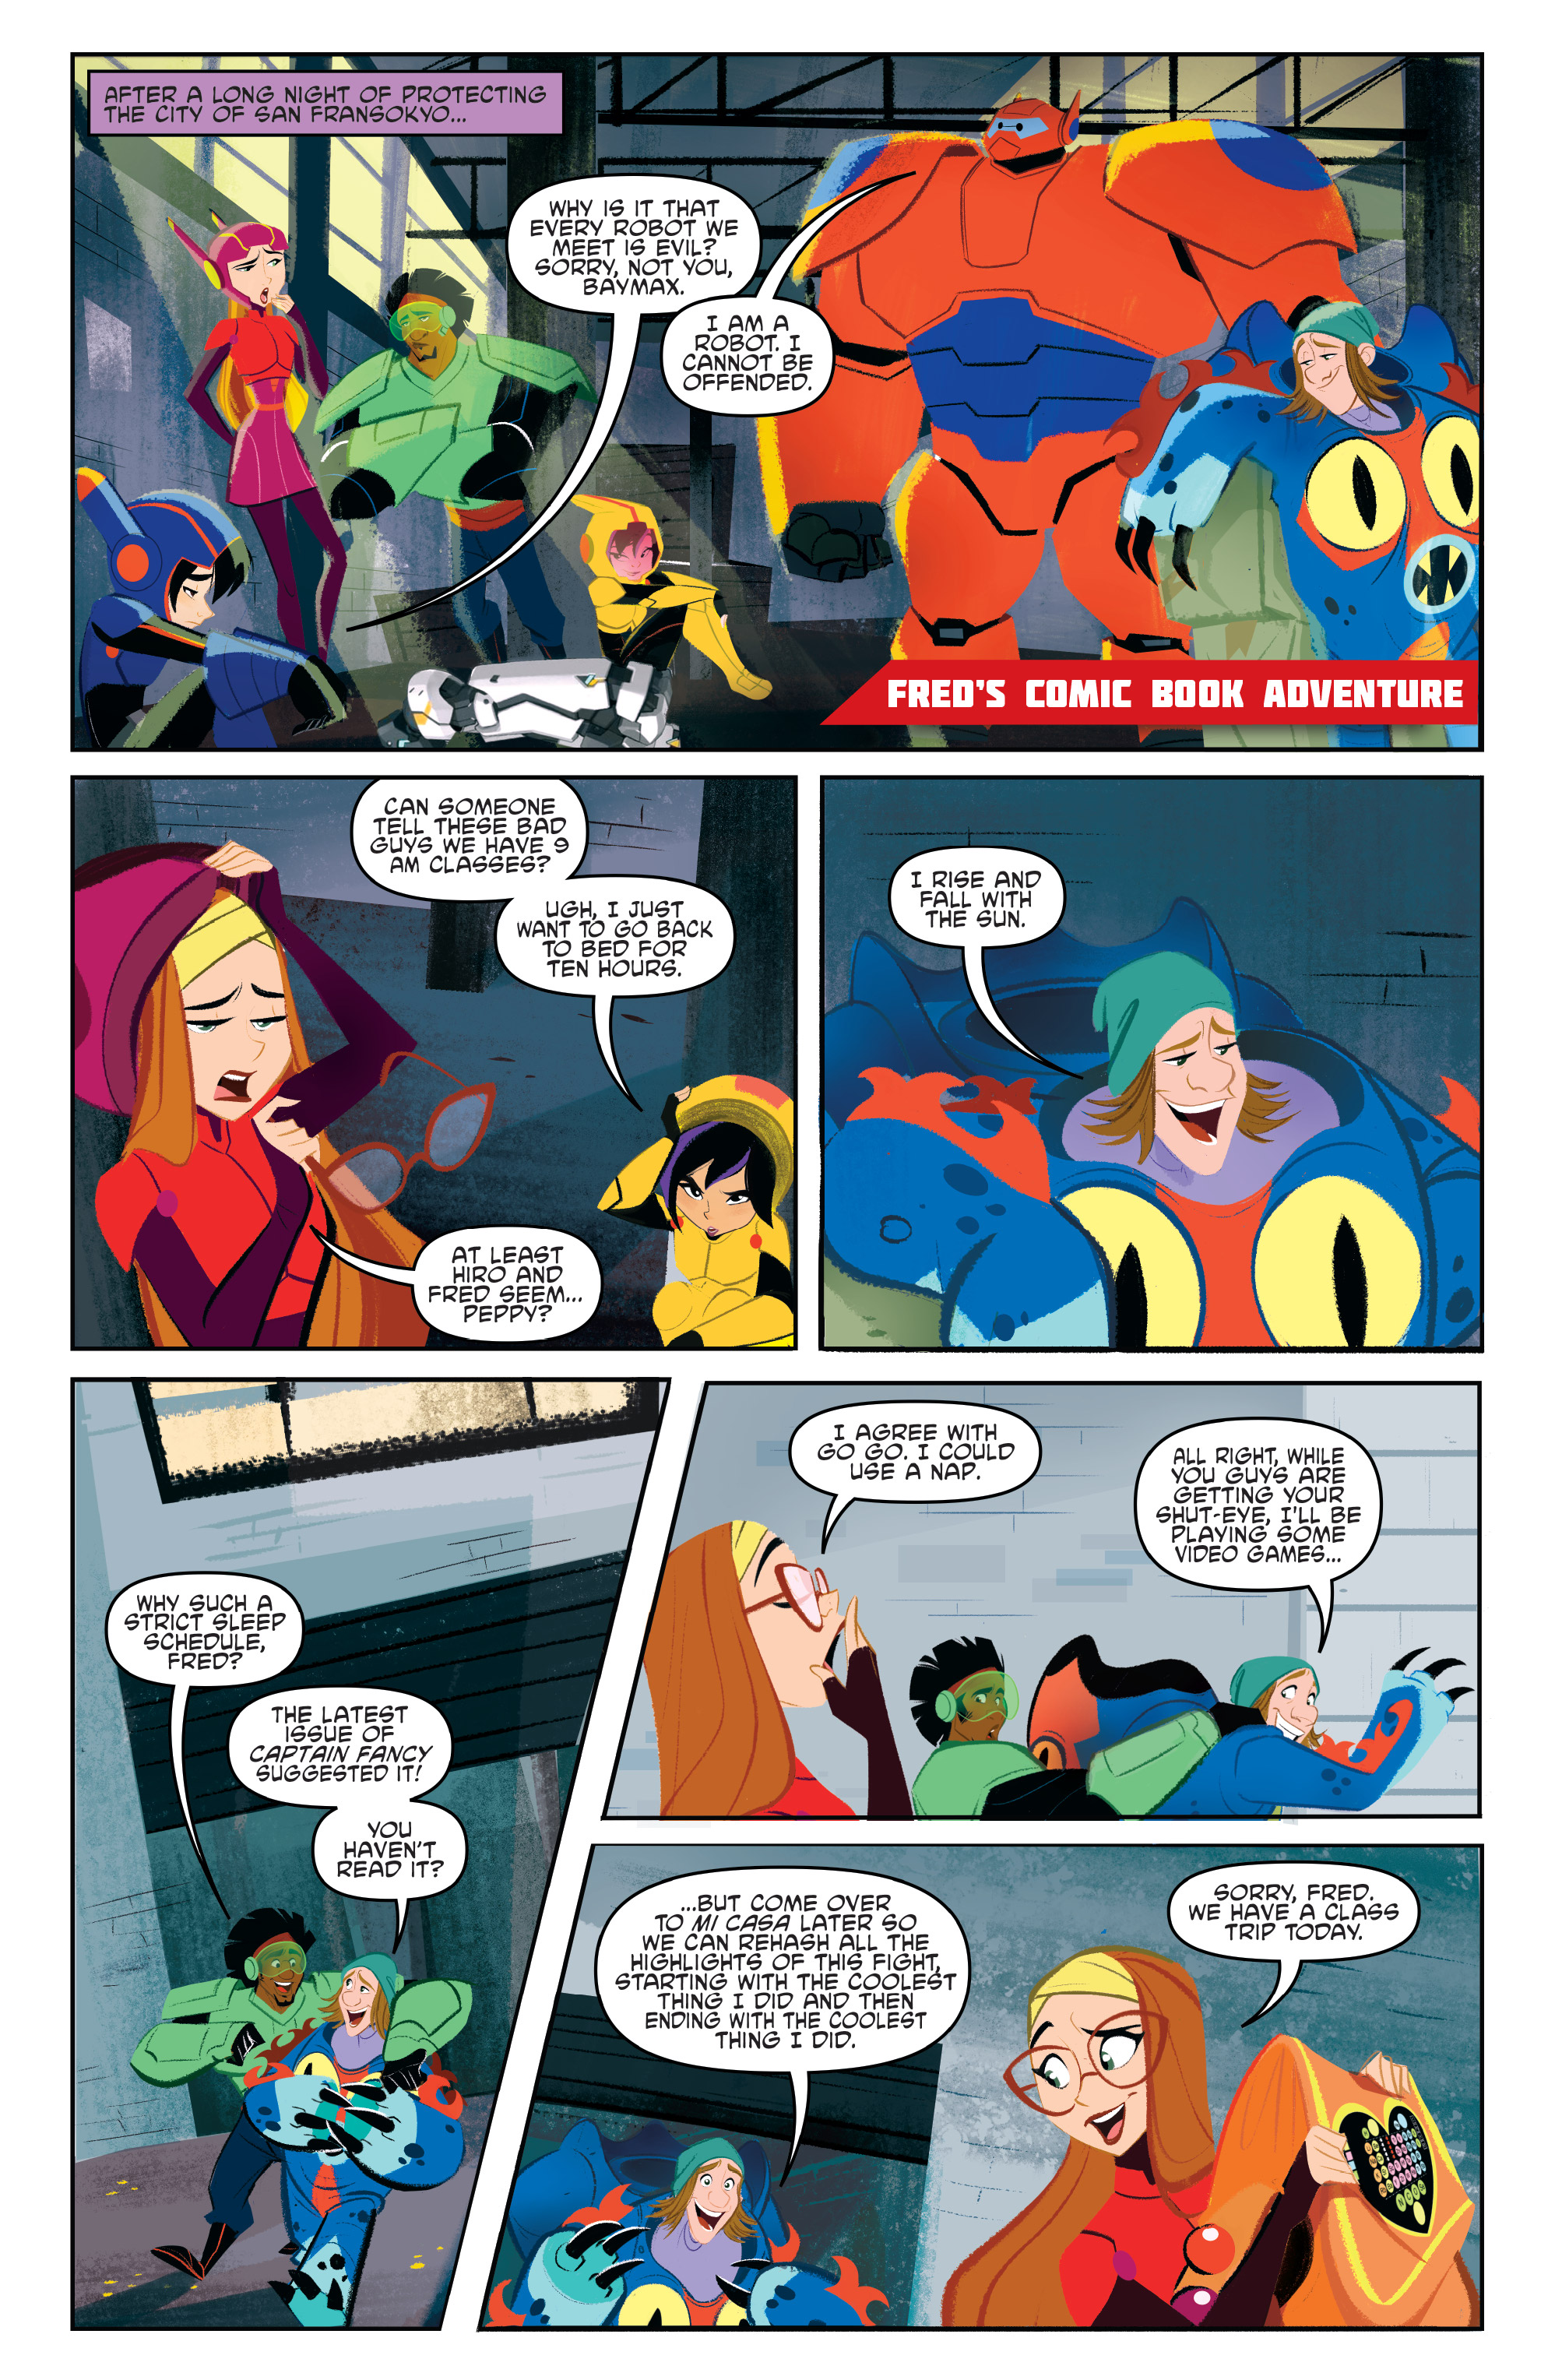 Big Hero 6 The Series Issue 1 | Read Big Hero 6 The Series Issue 1 comic  online in high quality. Read Full Comic online for free - Read comics  online in high quality .|viewcomiconline.com